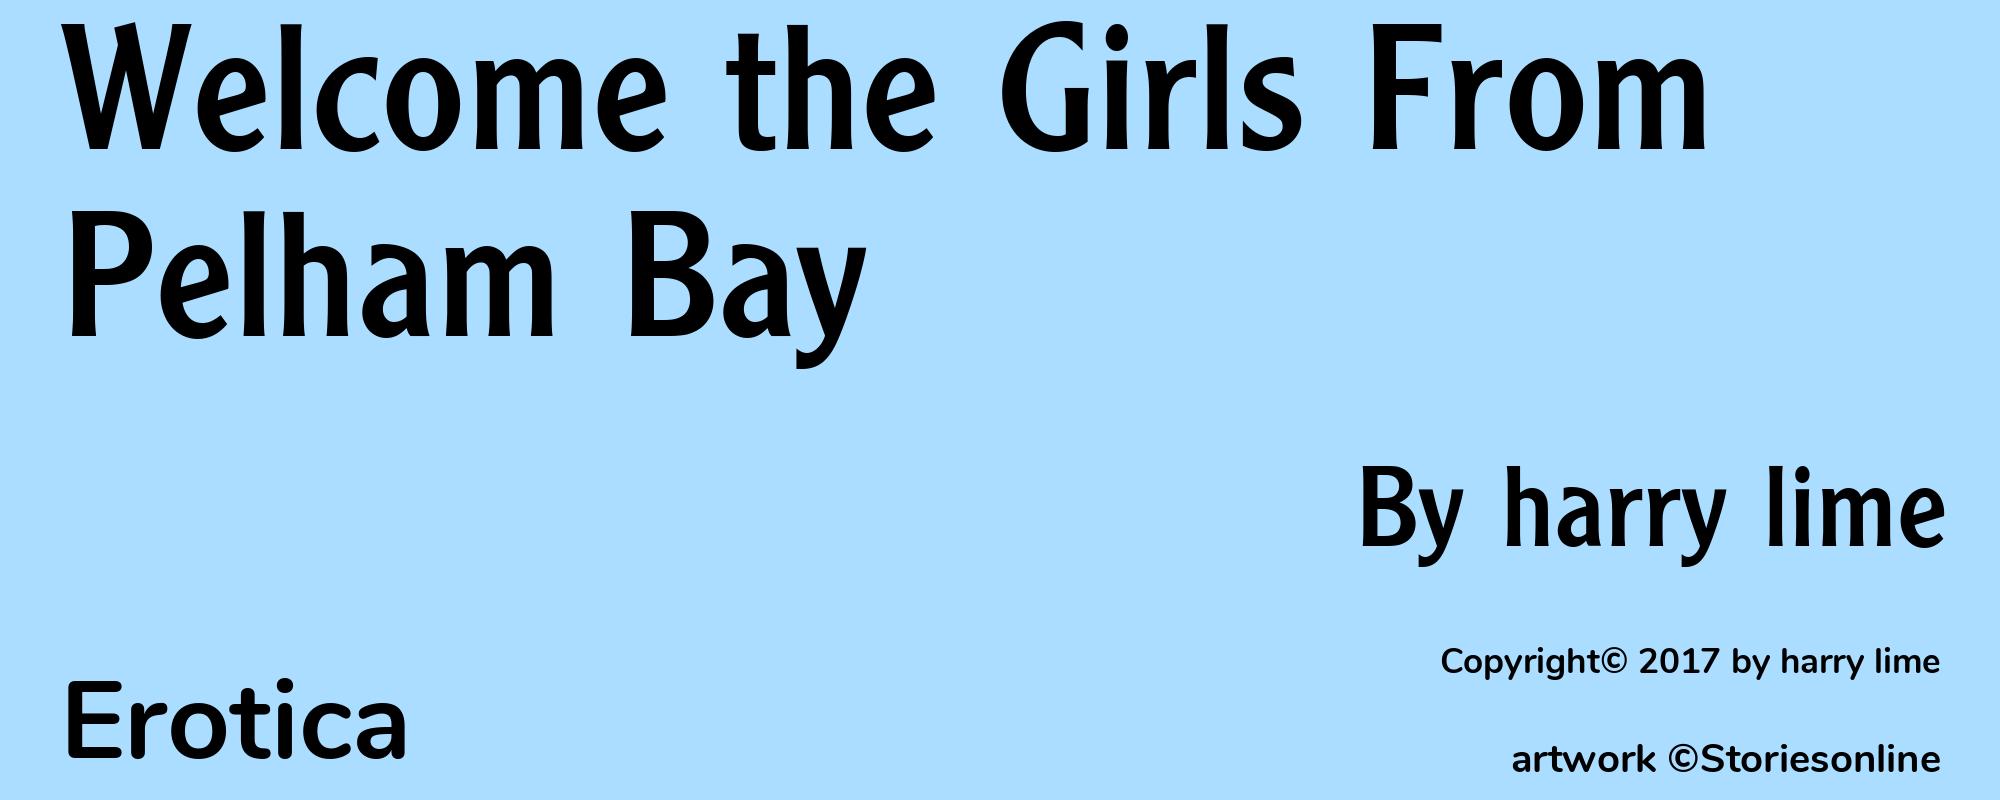 Welcome the Girls From Pelham Bay - Cover